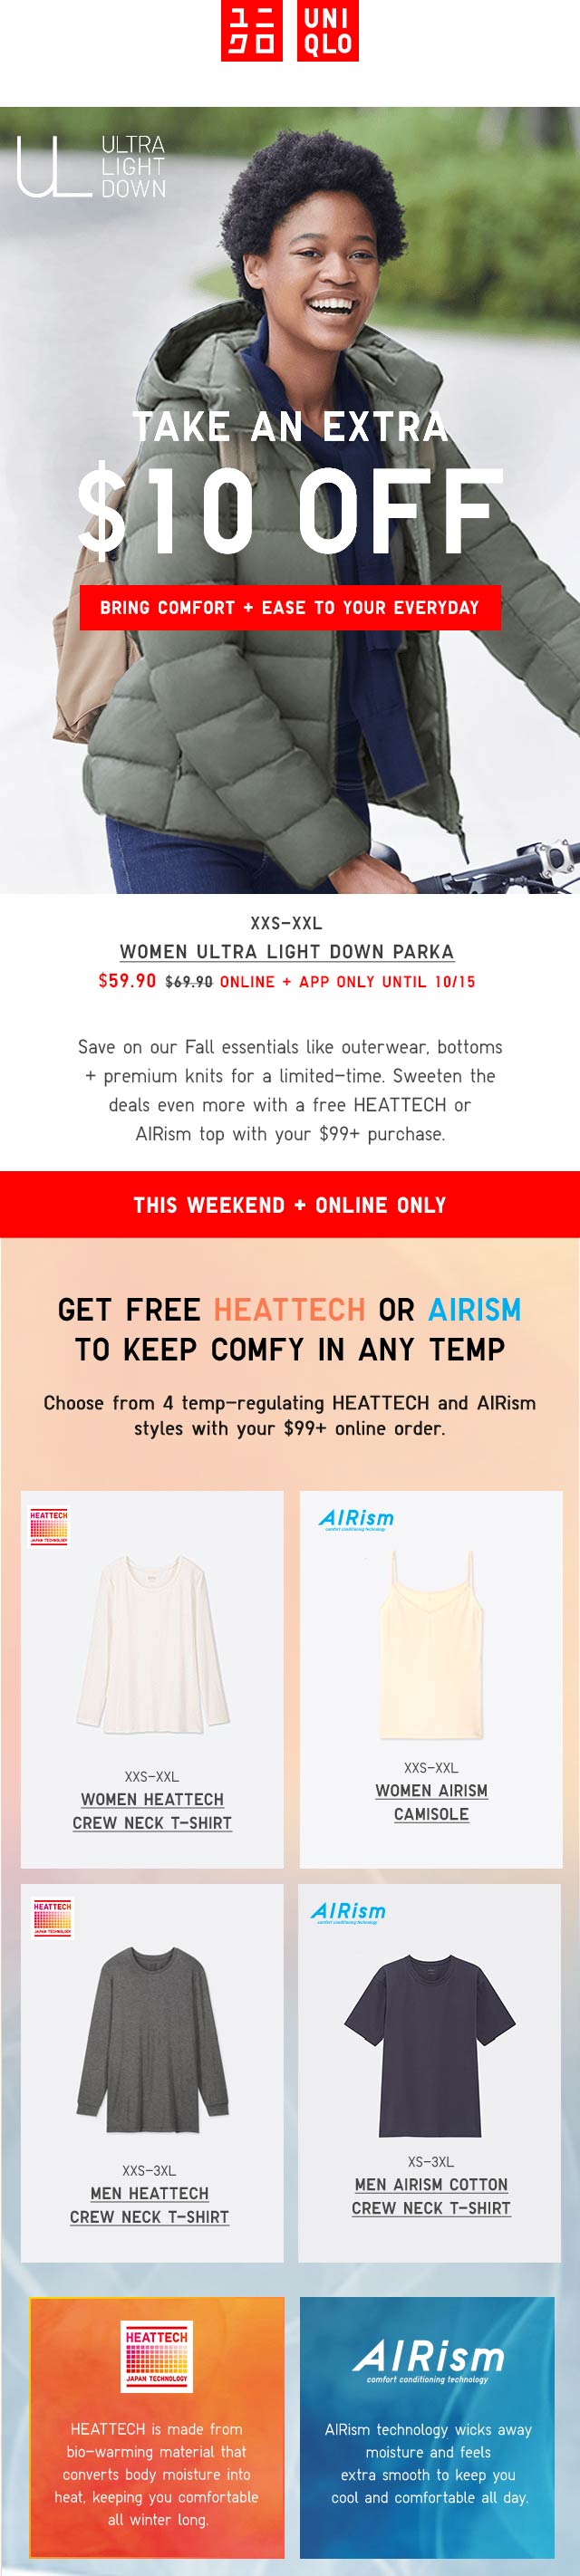 UNIQLO stores Coupon  $10 off everything + free HEATTECH or AIRism with $99 spent at UNIQLO #uniqlo 